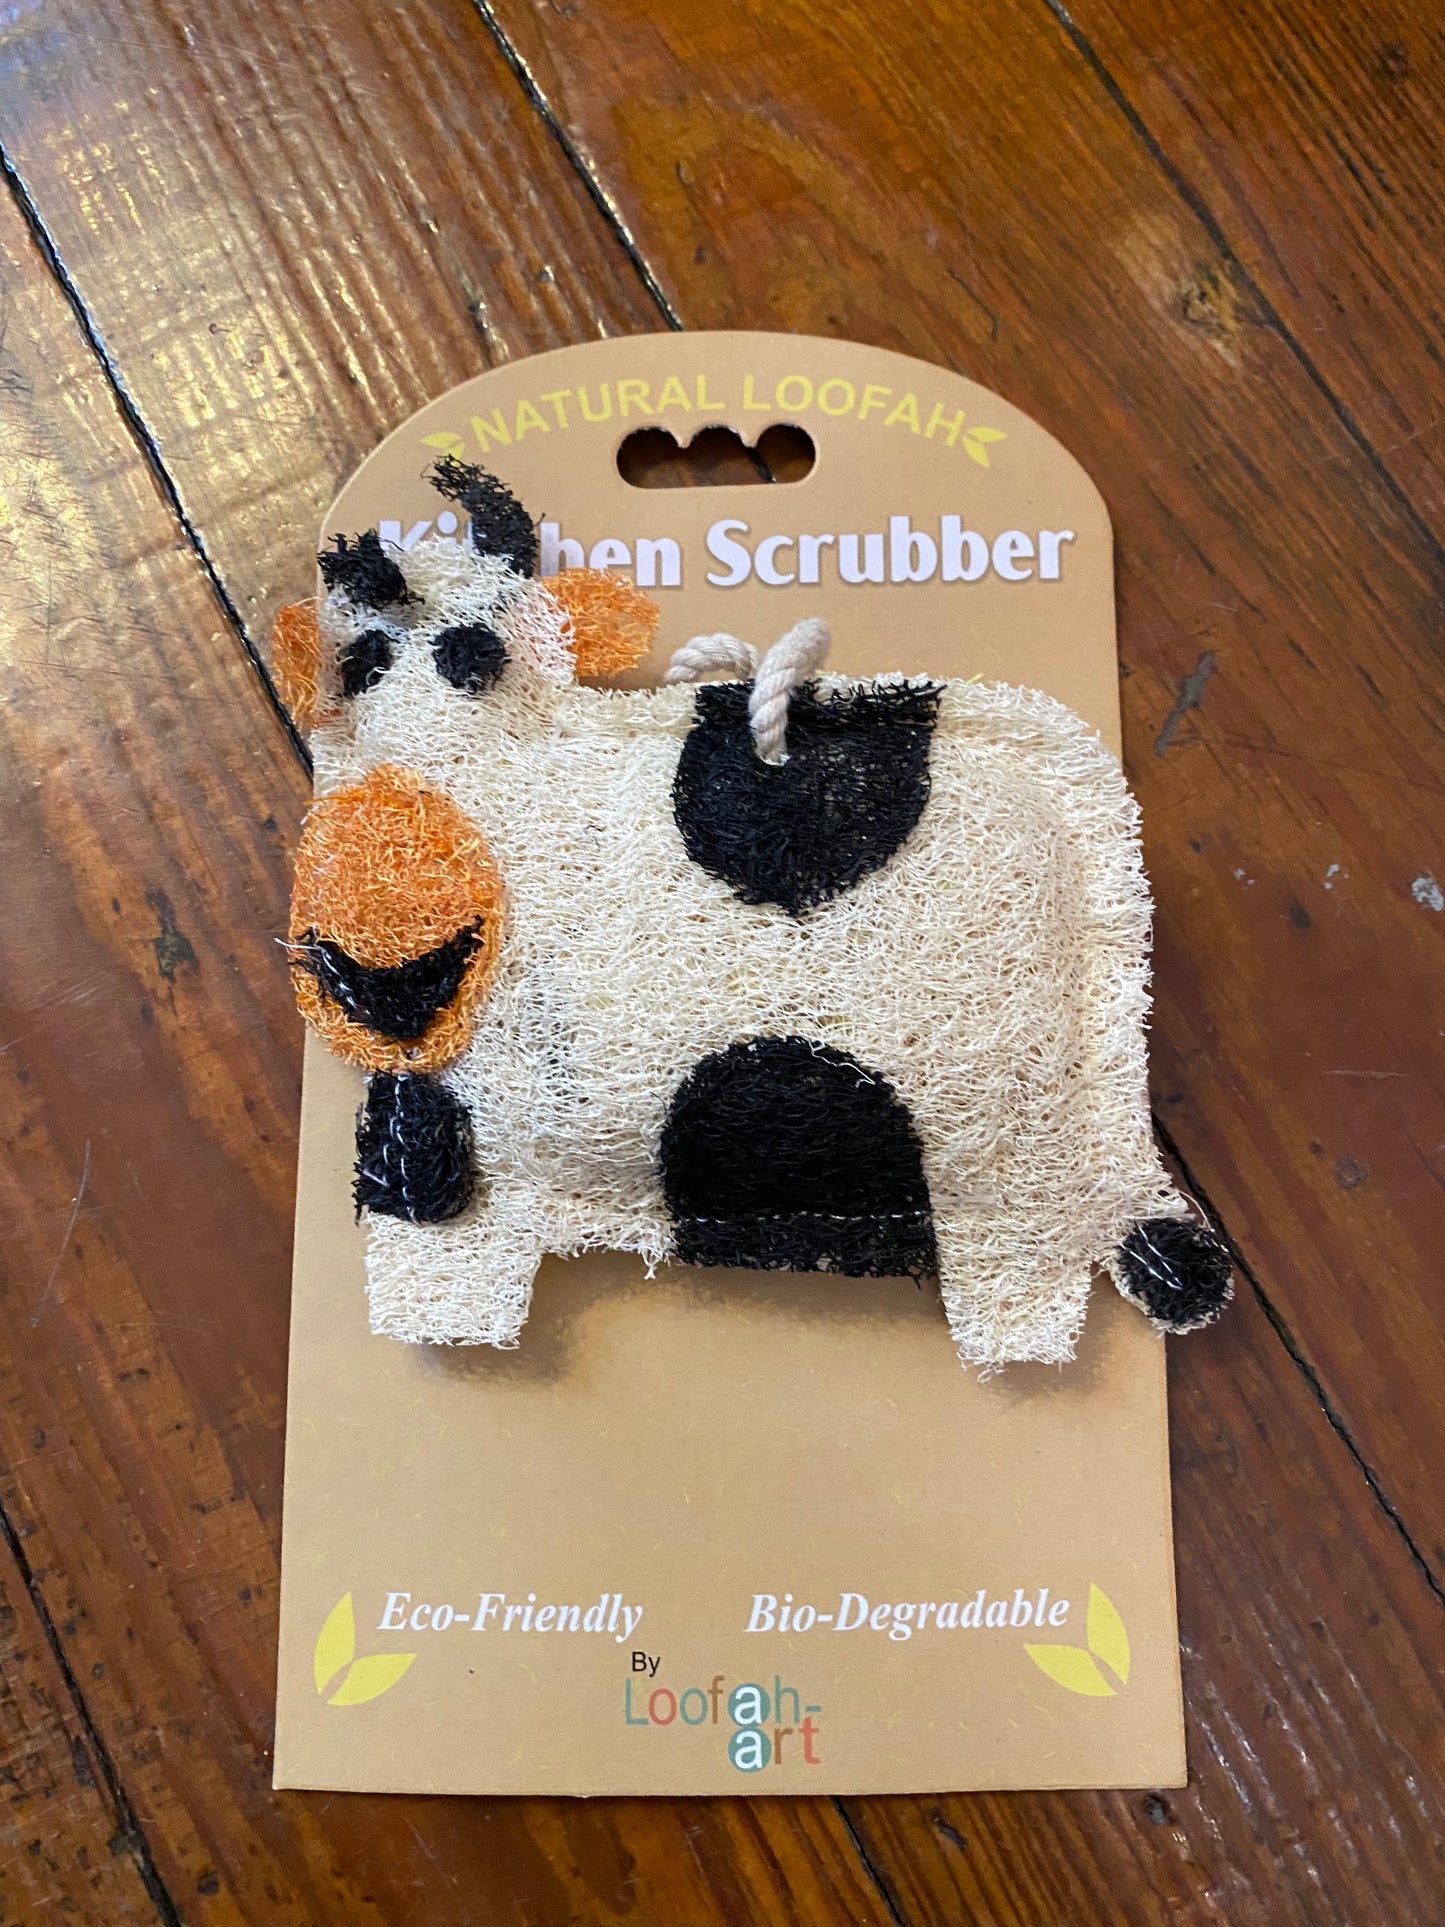 Kitchen Scrubber (colors may vary)